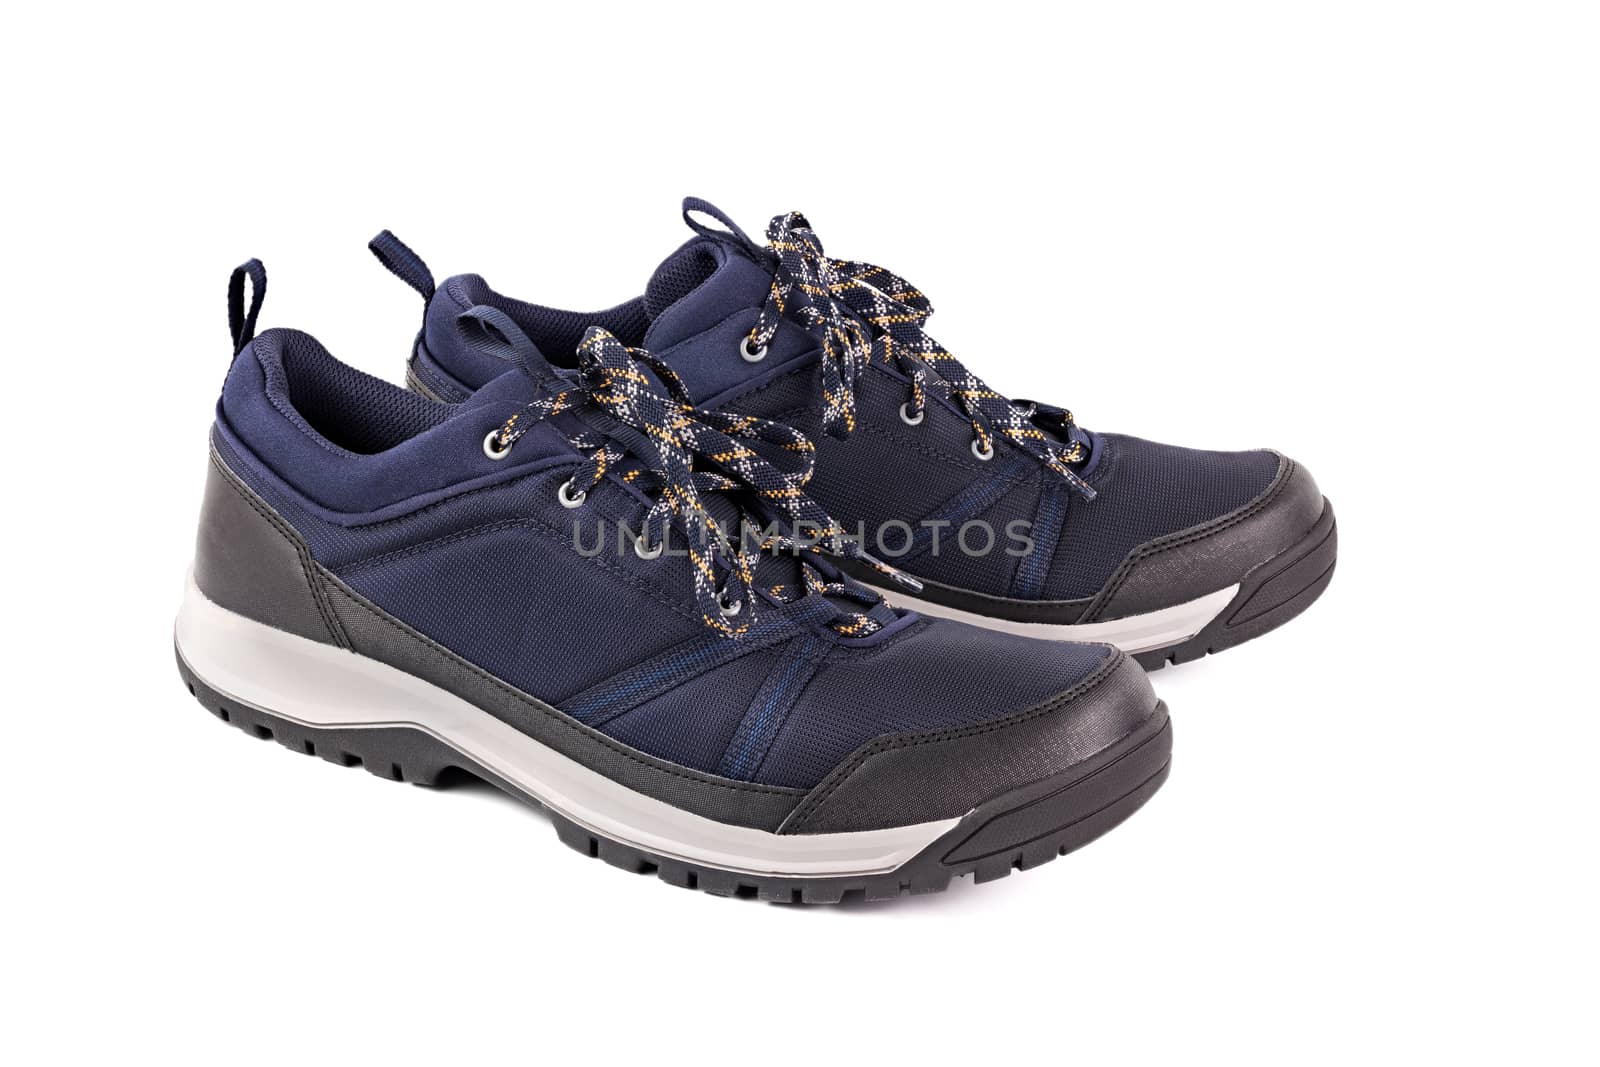 black and blue outdoor empty lightweight waterproof breathable fabric sneakers isolated on white background.